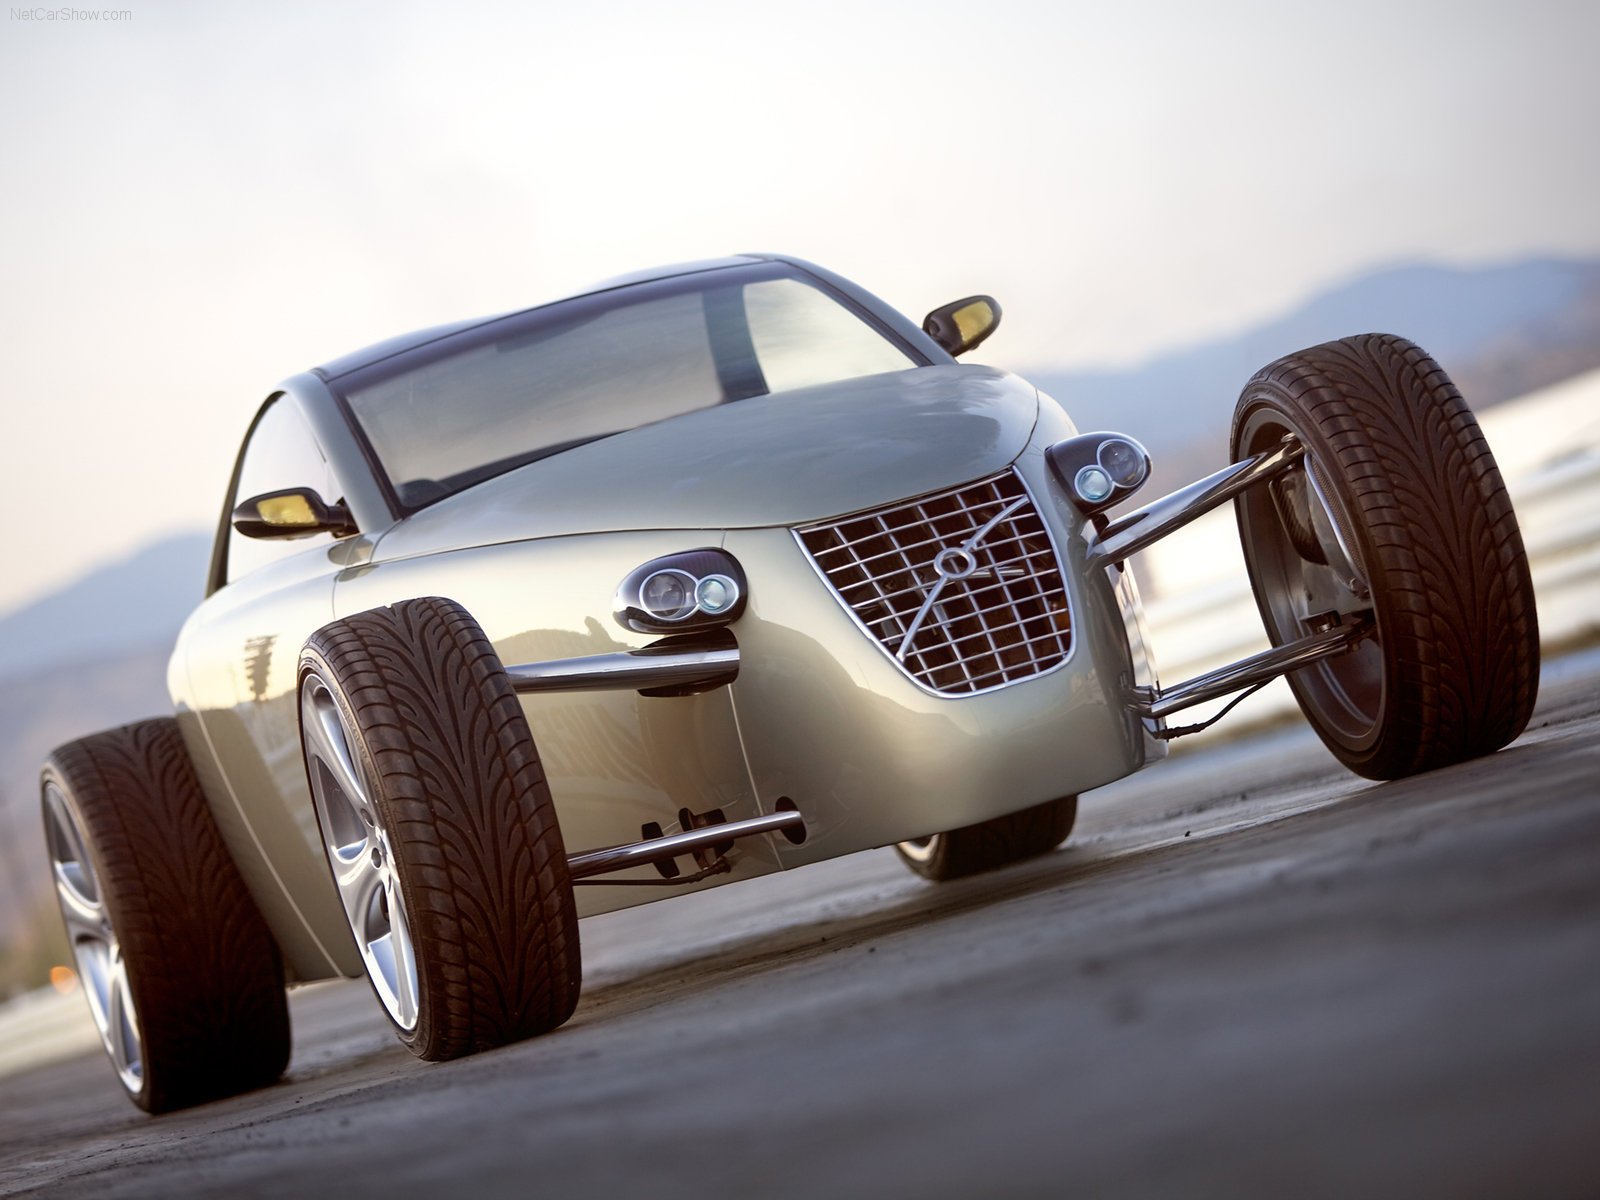 concept, Roadster, Supercars, Volvo, T6, Cars, 2005 Wallpaper